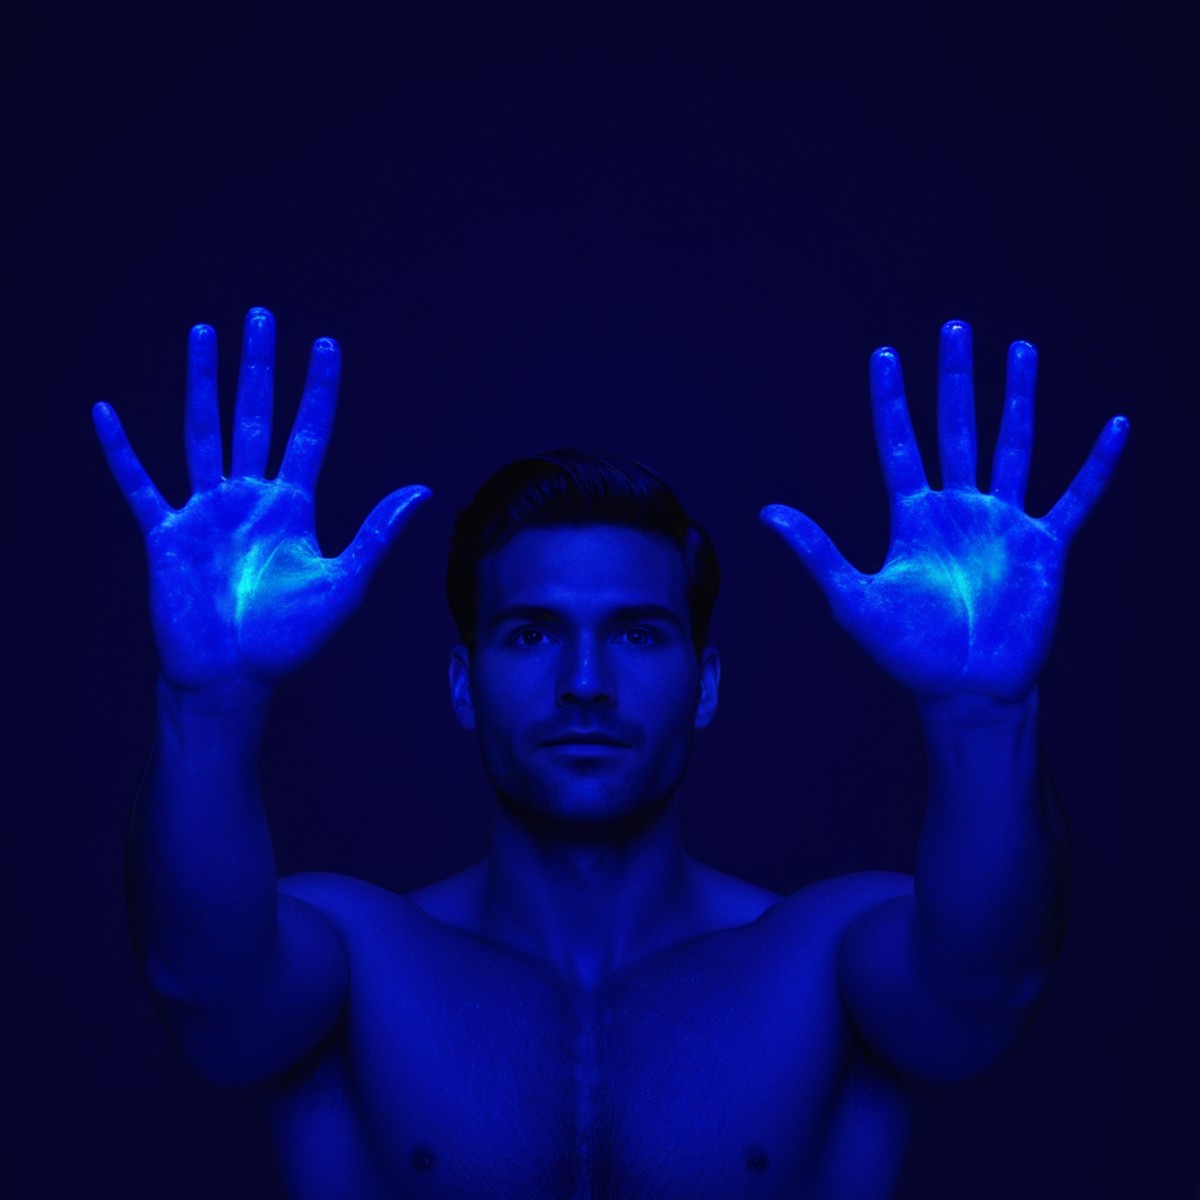 cinematic film still of  <lora:Ultraviolet lighting Style:1>
a person with their hands painted blue Ultraviolet lighting S...